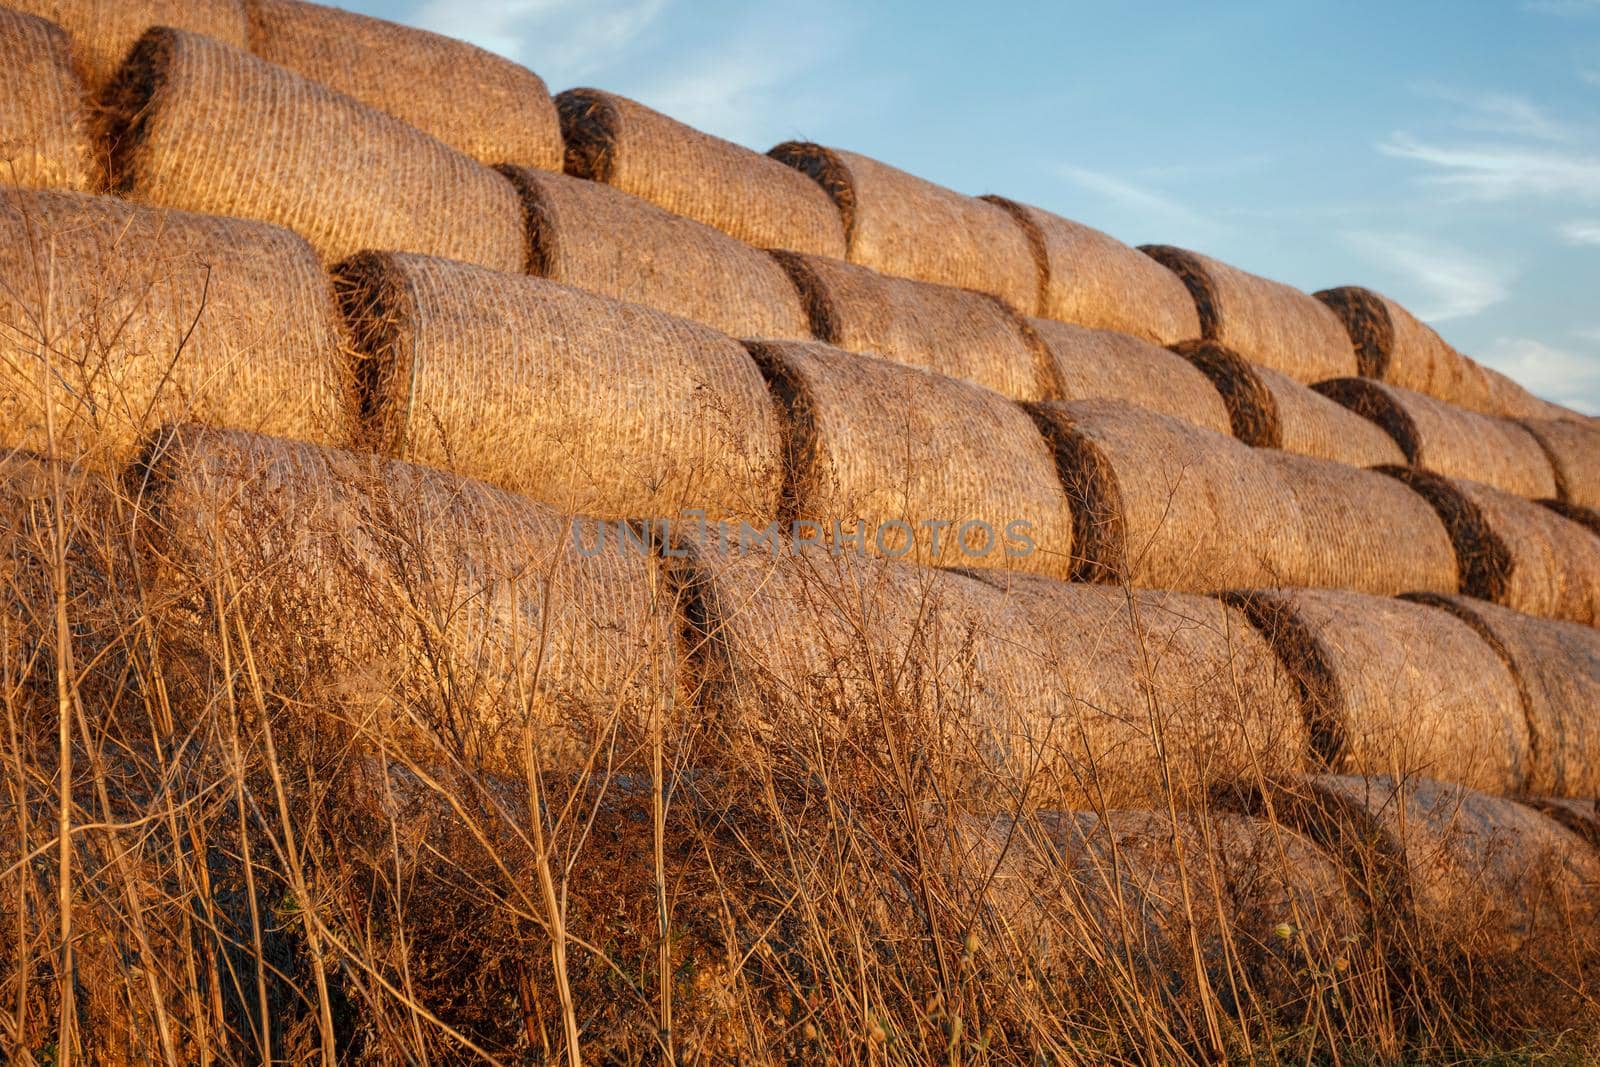 Straw or hay stacked in a field after harvesting. Straw bale wall.